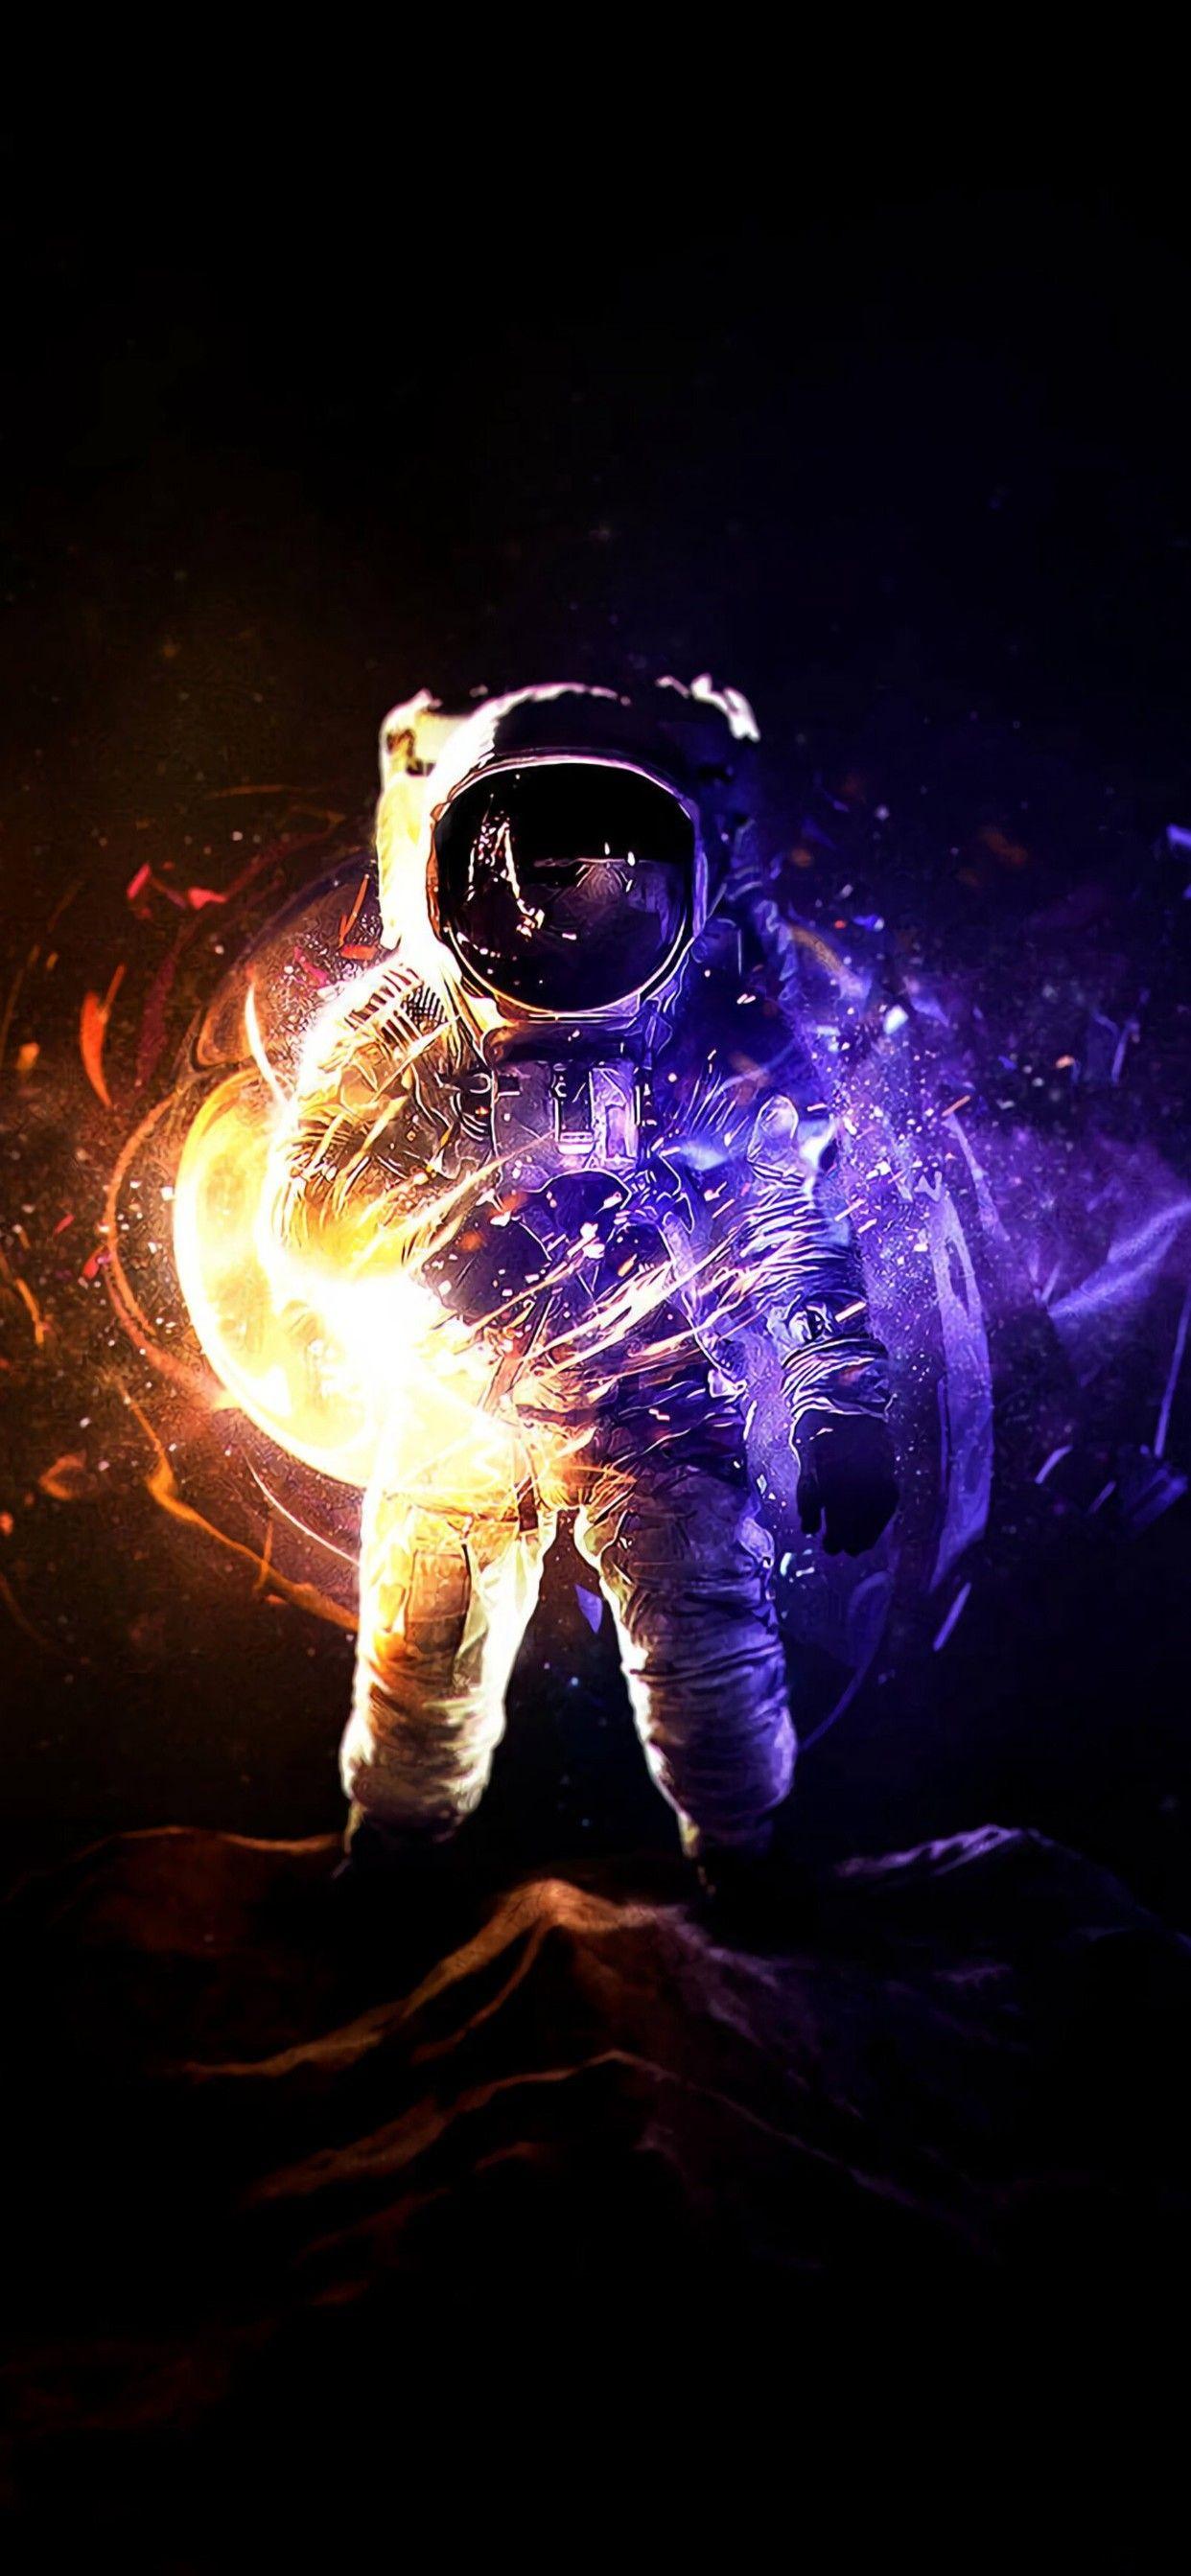 Cool Astronaut Wallpapers on